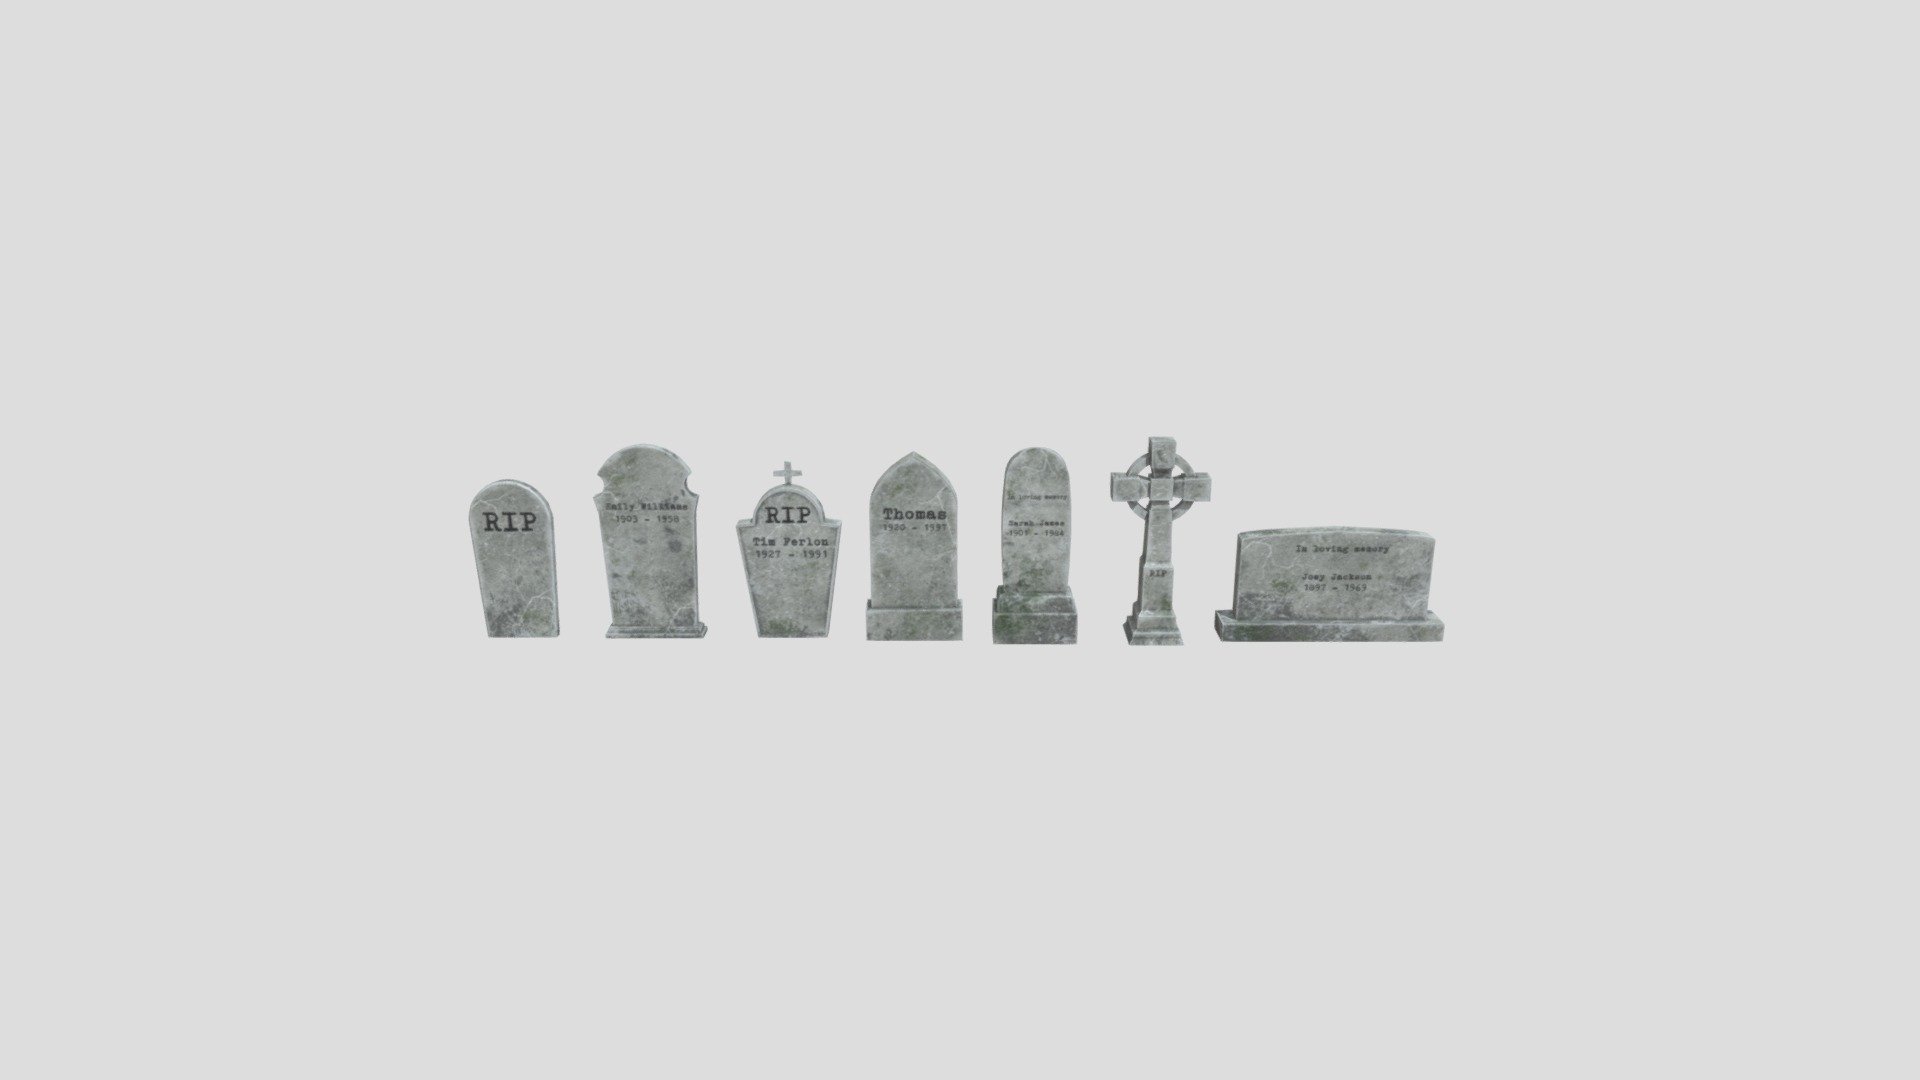 Low Poly Tombstone Pack Includes:

7 Tombstone Meshes
4 Texture Files (4K with Text, 4K without Text, 8K with Text, 8K without Text)
All the meshes share one UV Map and have been unwrapped for future texturing if that interests you 3d model